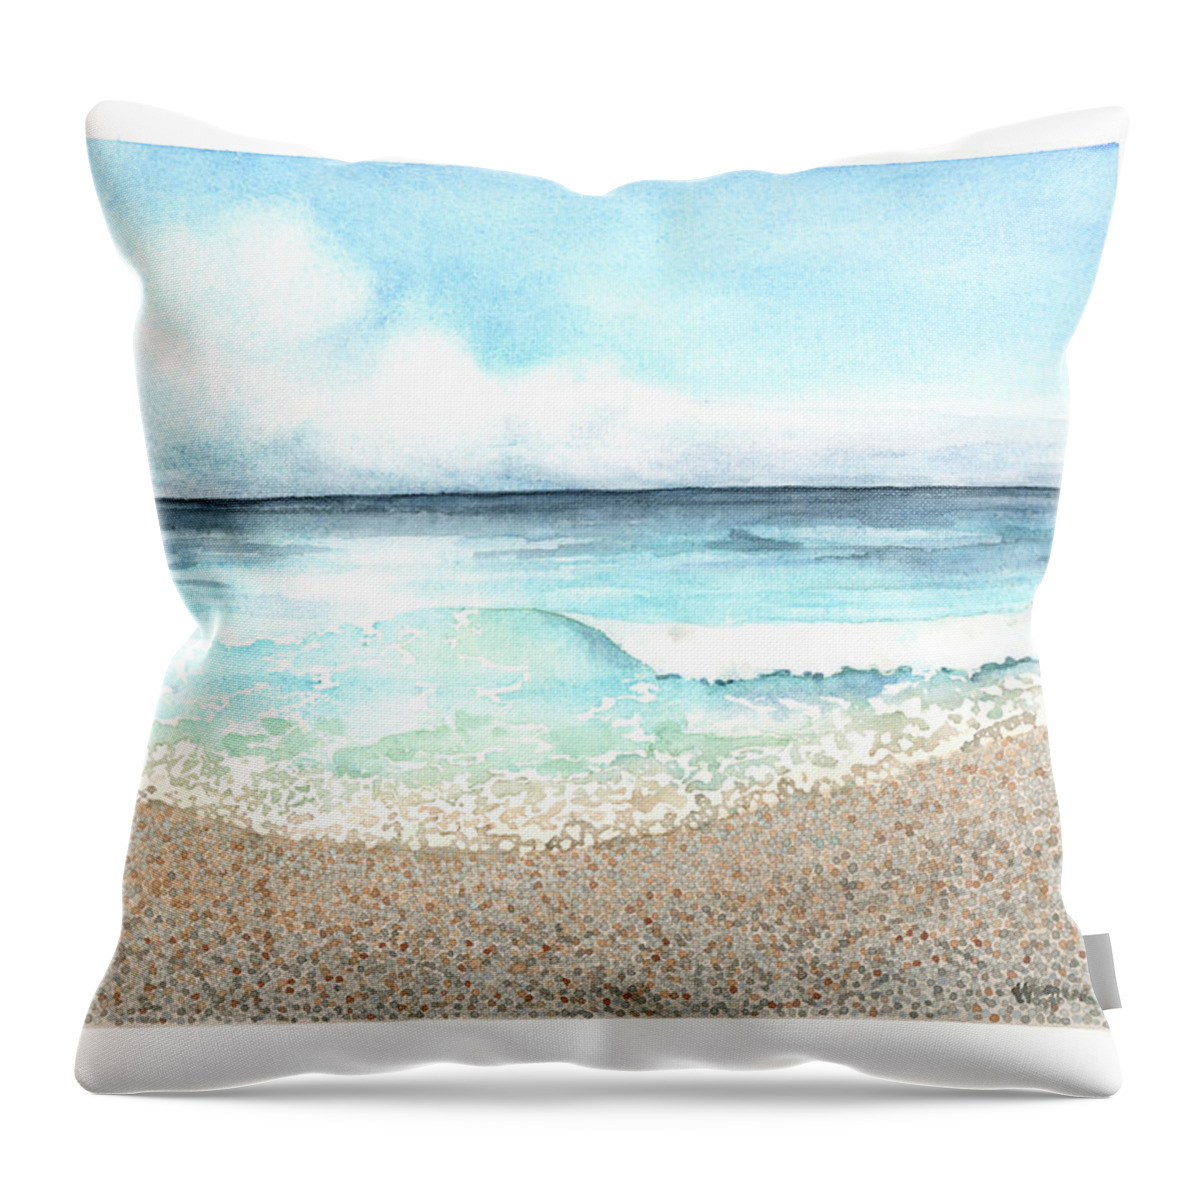 Gulf Coast Throw Pillow featuring the painting Peaceful, Easy Feeling by Hilda Wagner